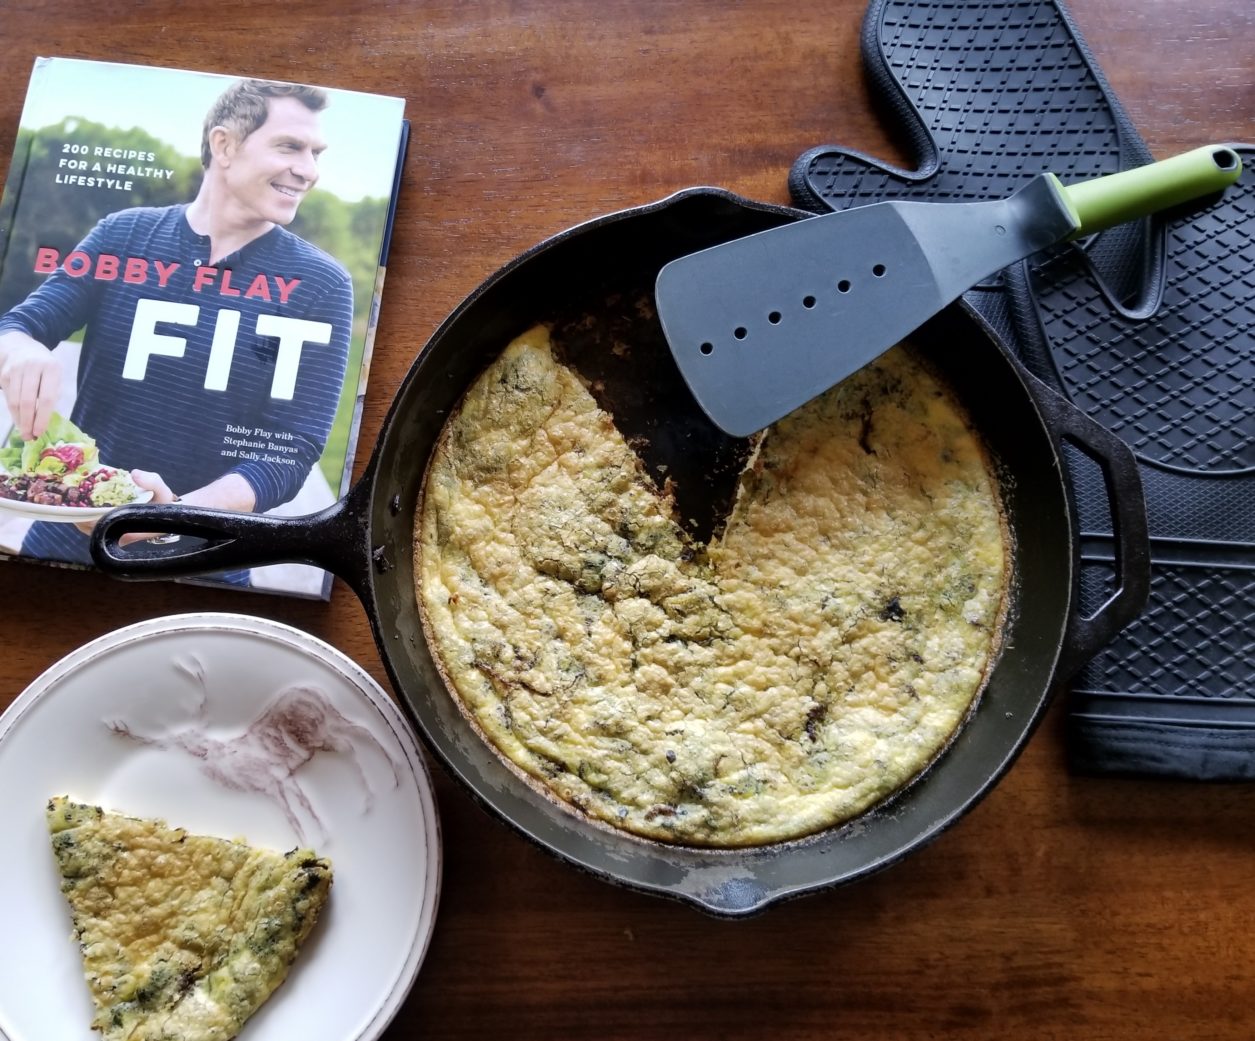 Cookware  Bobby flay recipes, Cooking, Bobby flay